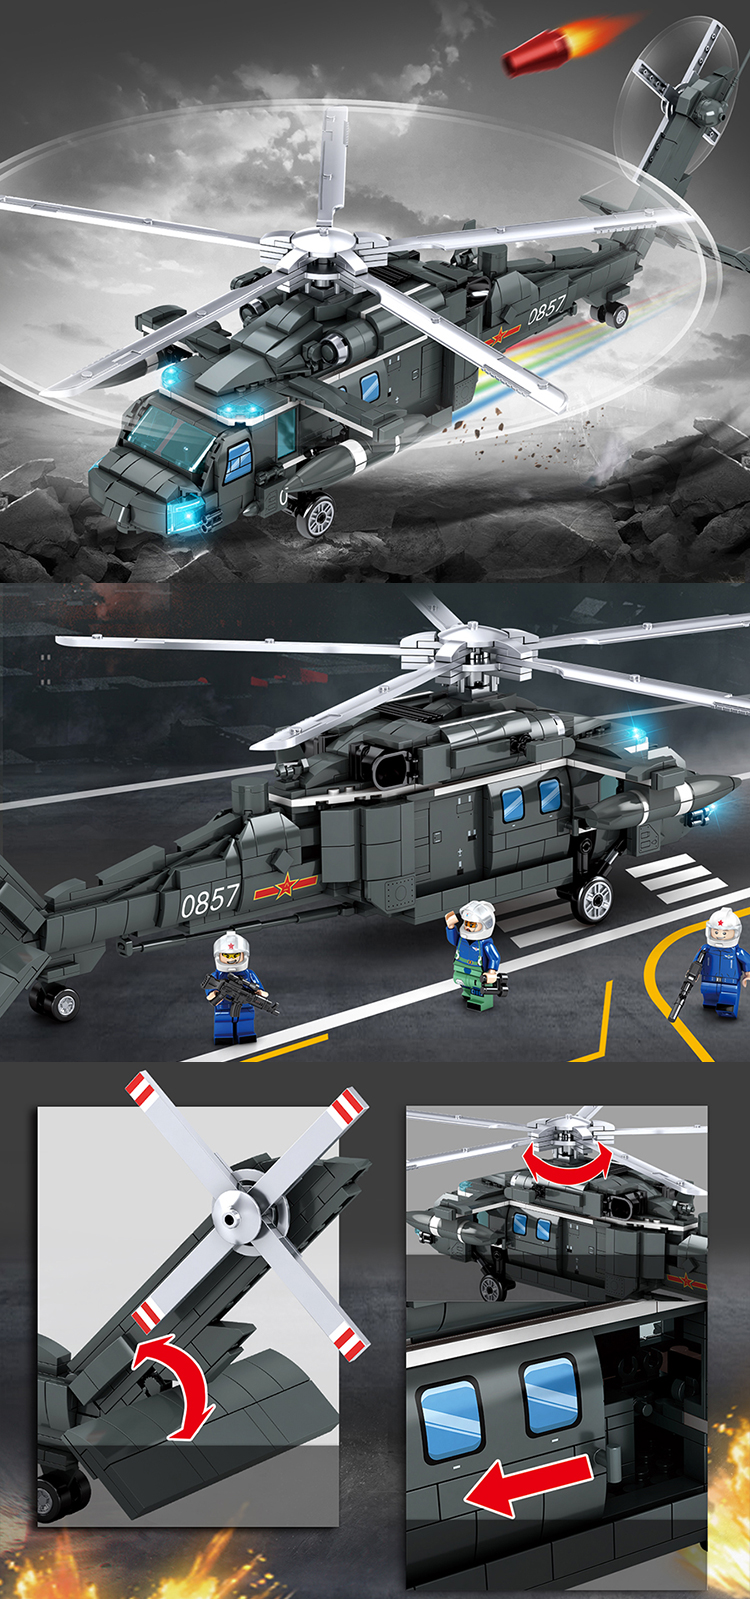 WOMA TOYS 2021 Big Helicopter Plane Model Airplane Small Building Blocks Diy Bricks Star Sky Fighter Birthday Gift For Boys